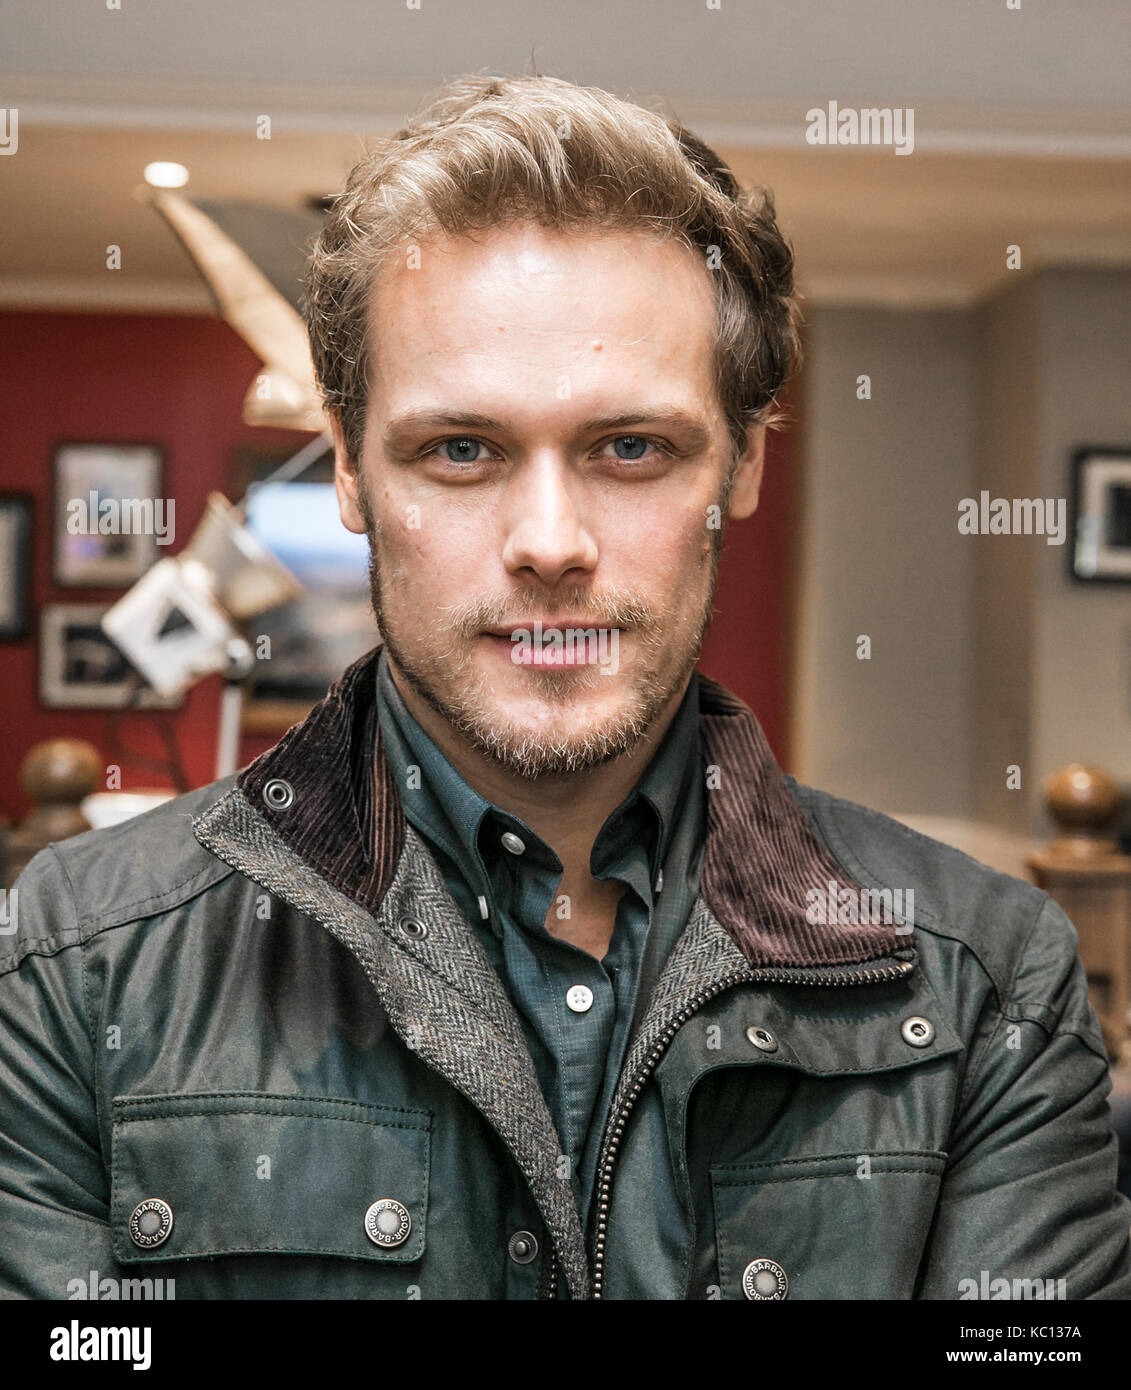 New York, New York September 29th 2017. Actor Sam Heughan accepts position  as brand Ambassador for the Clothing line Barbour. Sppider/ Alamy Stock  Photo - Alamy